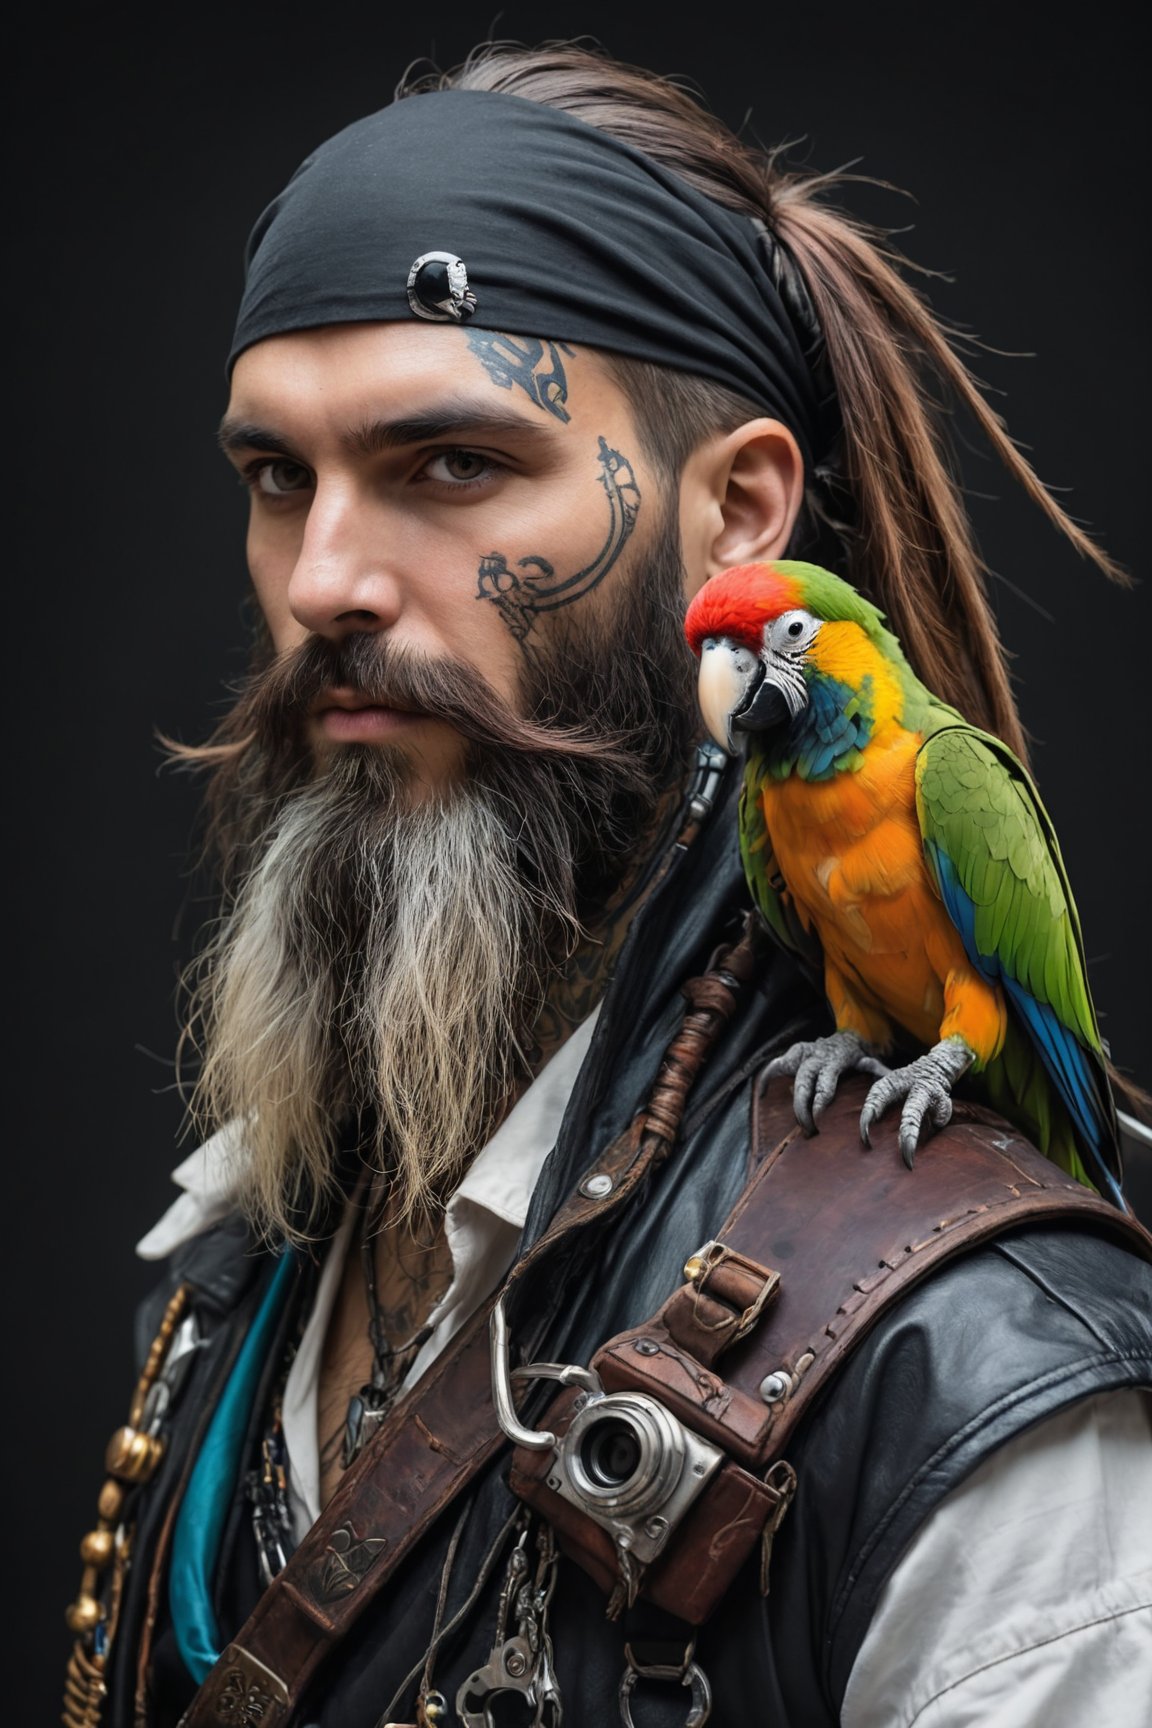 face portrait of a cyberpunk pirate woth a parrot on his shoulders, long beard, best quality